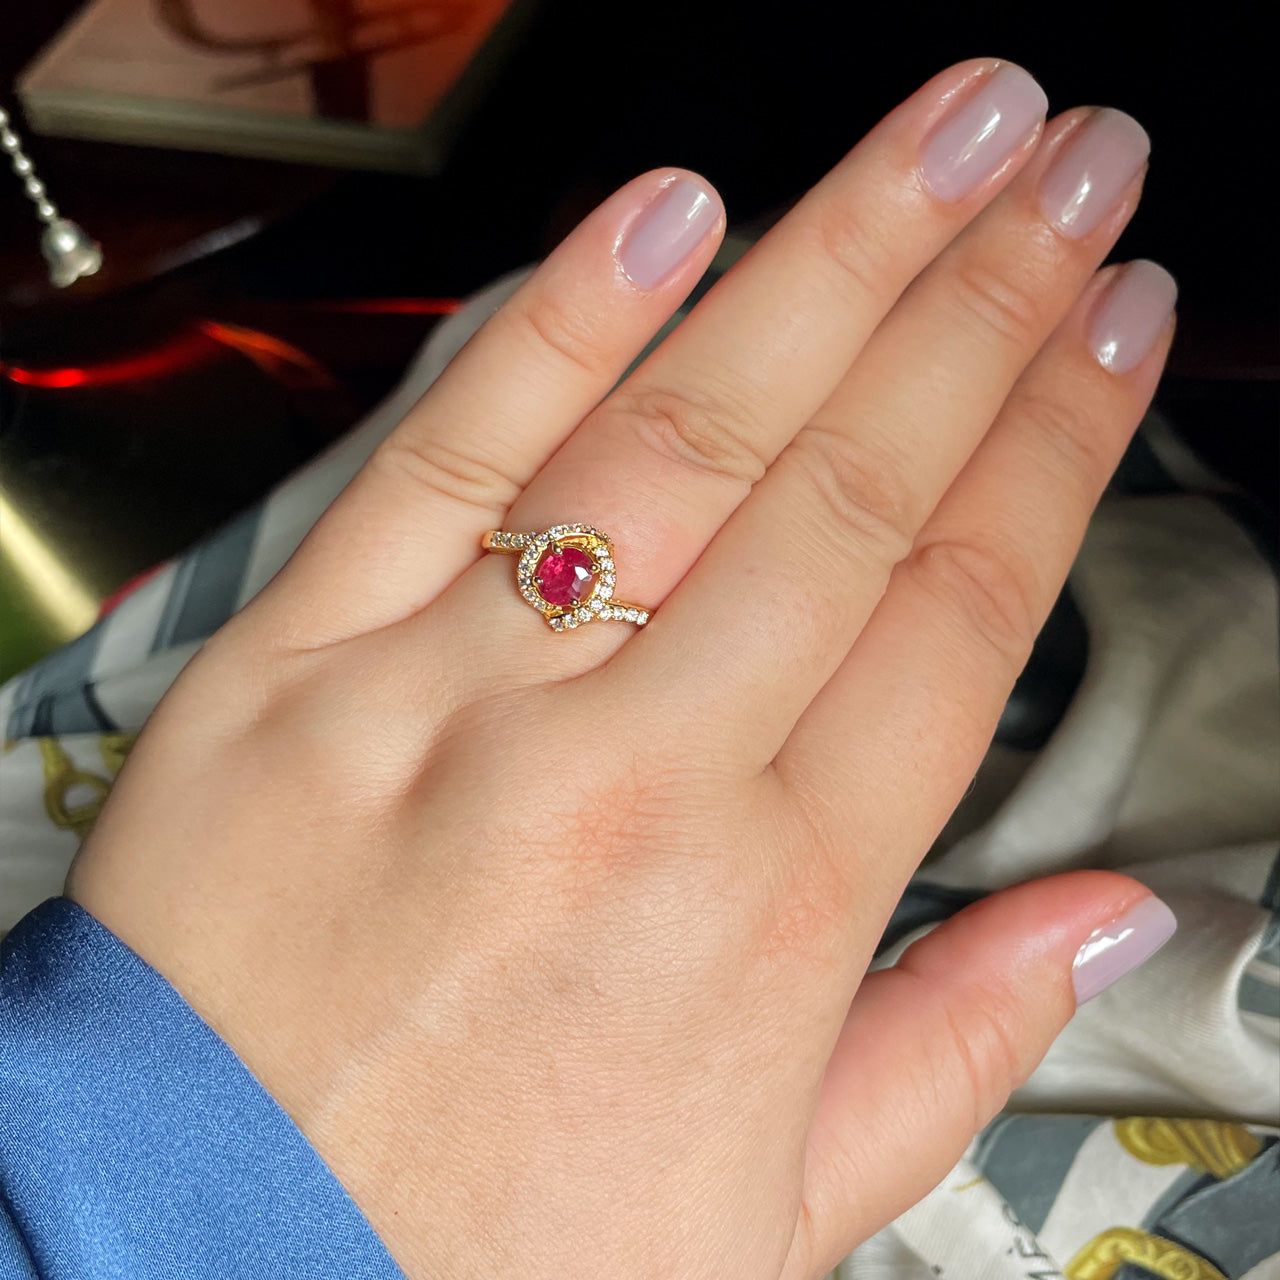 0.54ct unheated ruby ring on a woman's finger with an 18k yellow gold setting